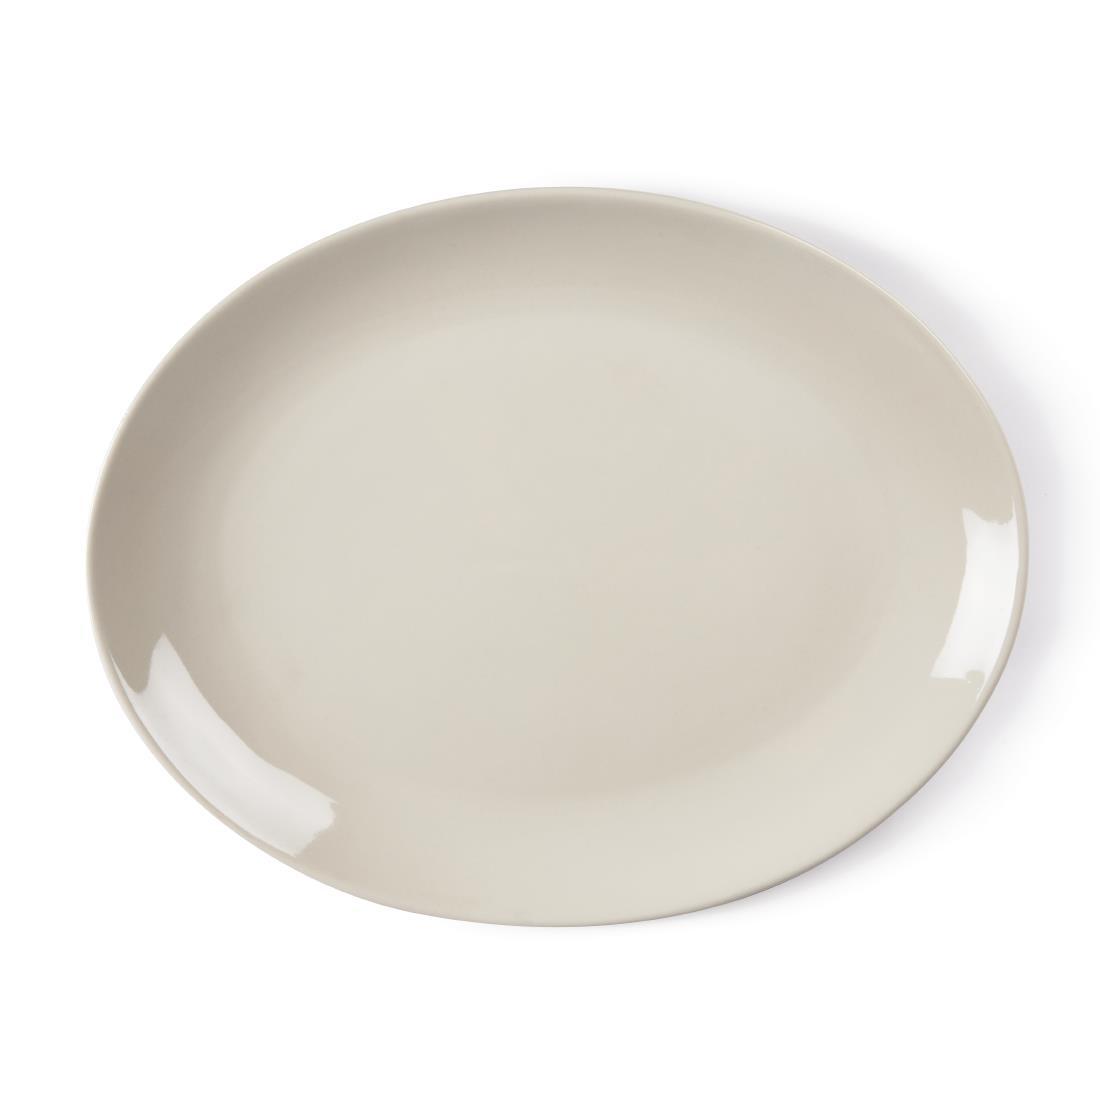 Olympia Ivory Oval Coupe Plates 330mm (Pack of 6) - U128  - 4